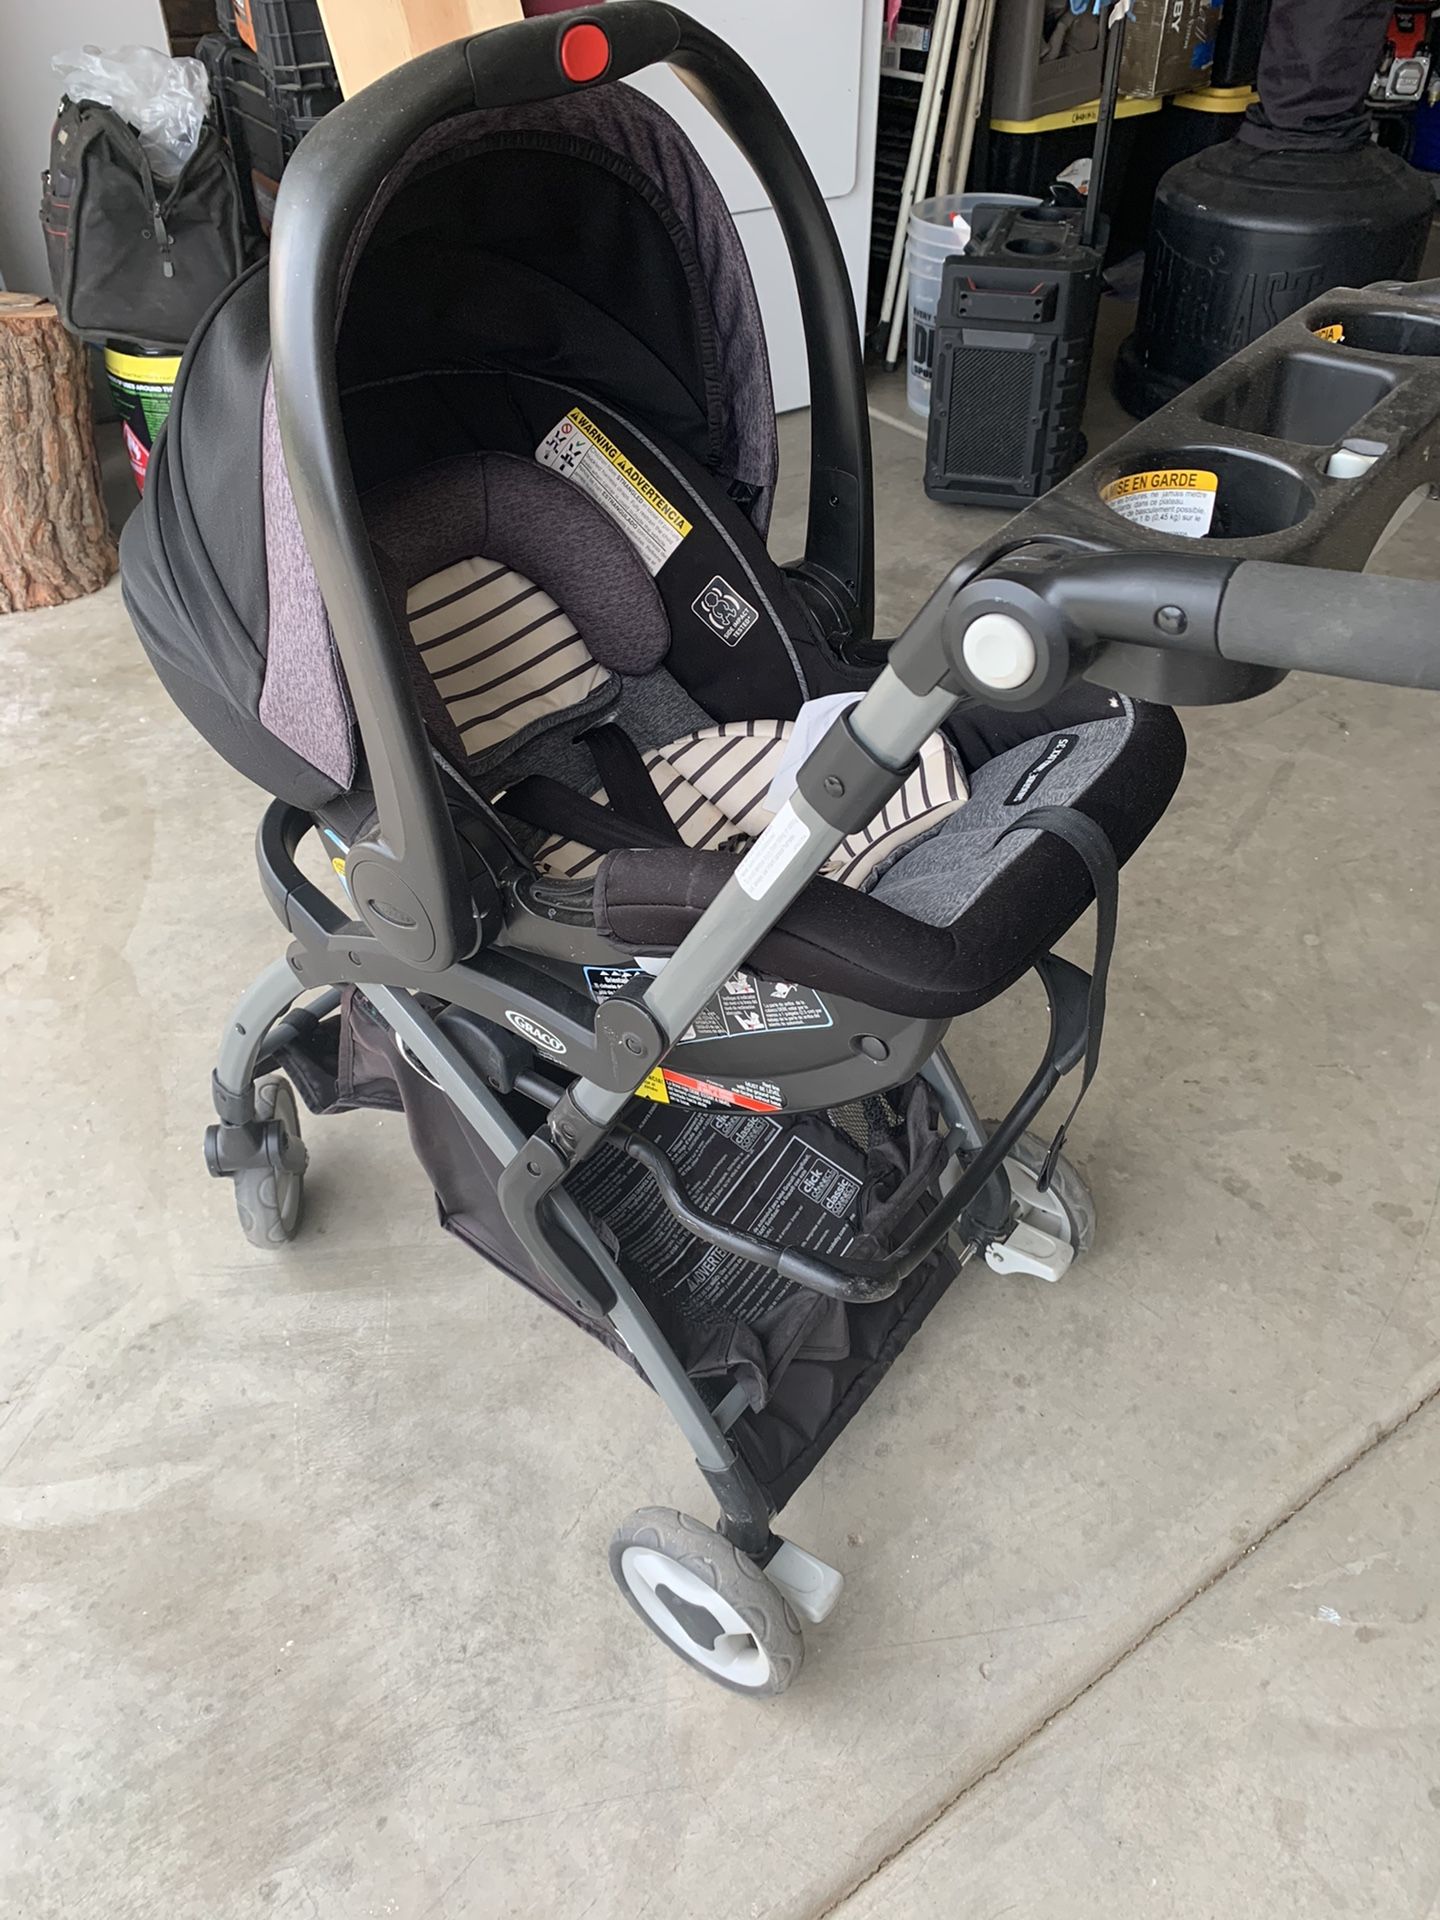 Graco Infant car seat and stroller